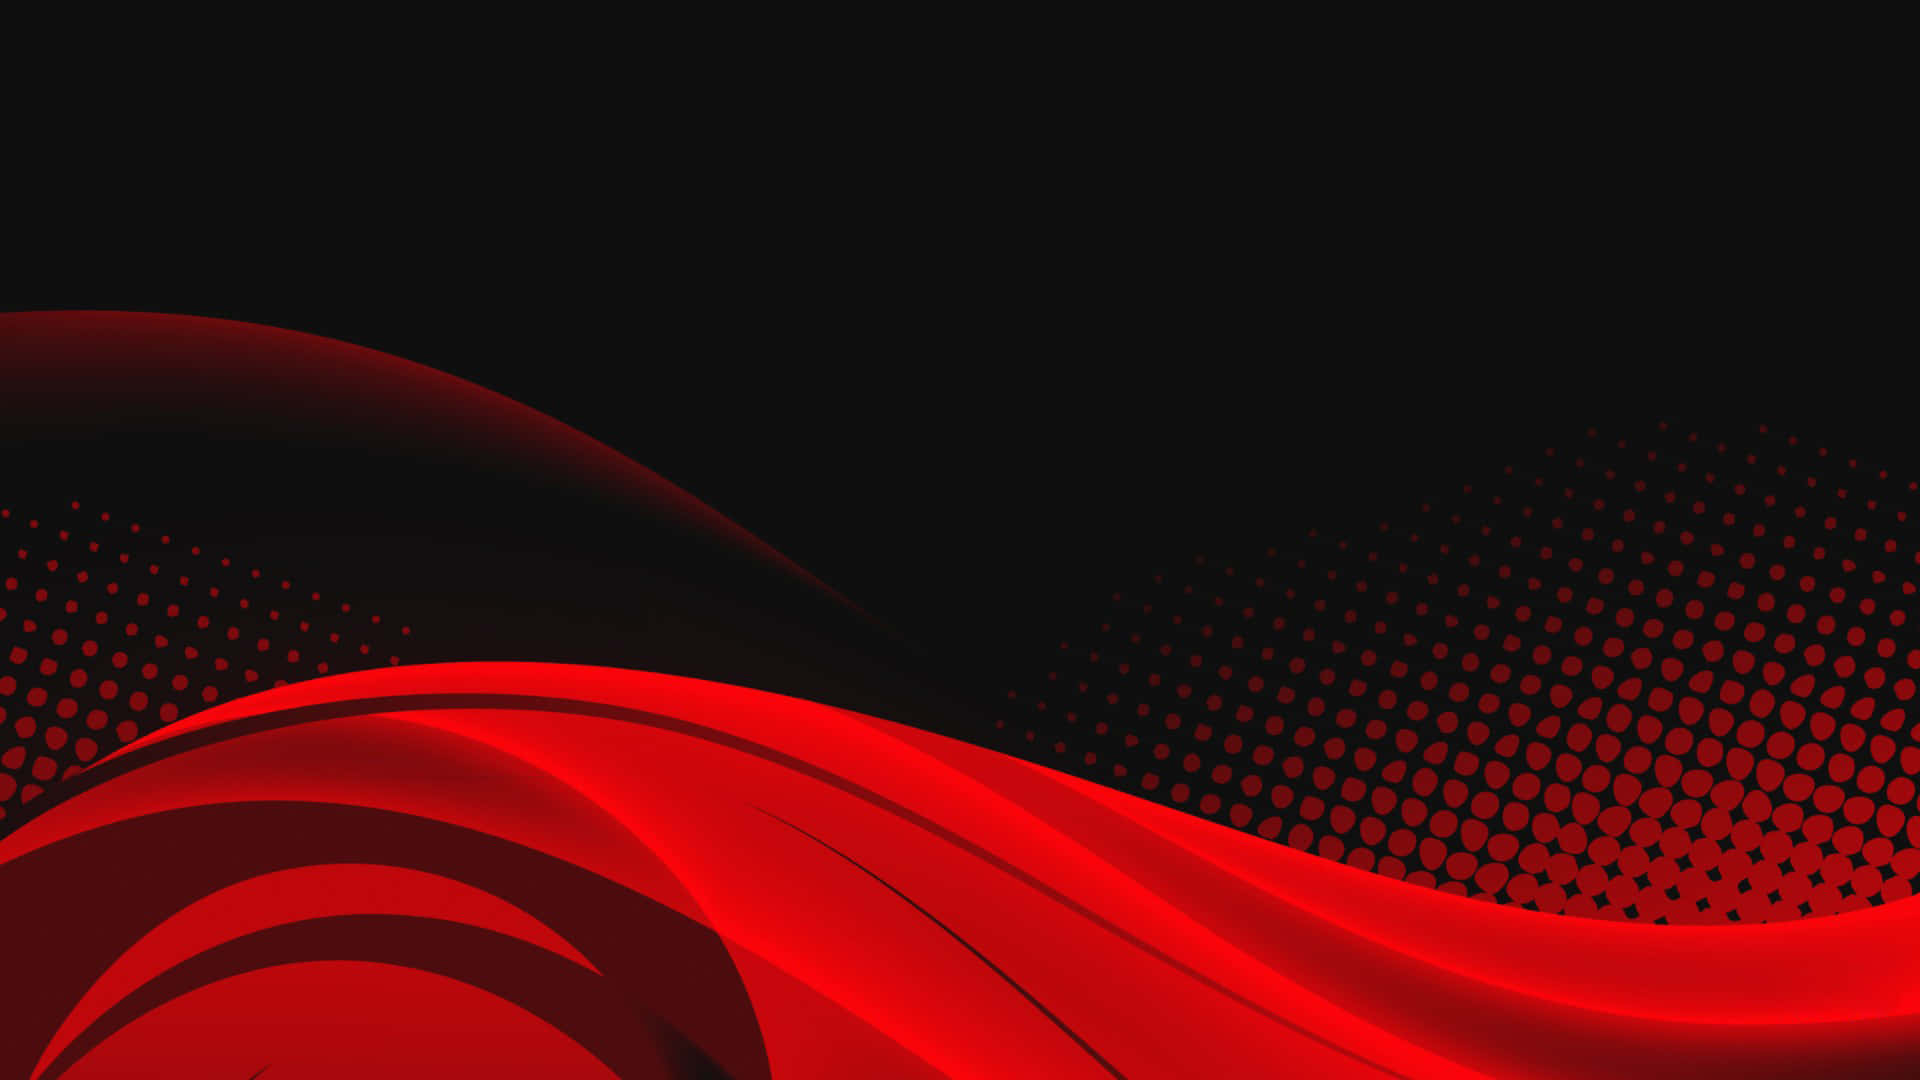 A Red And Black Background With A Wave Pattern